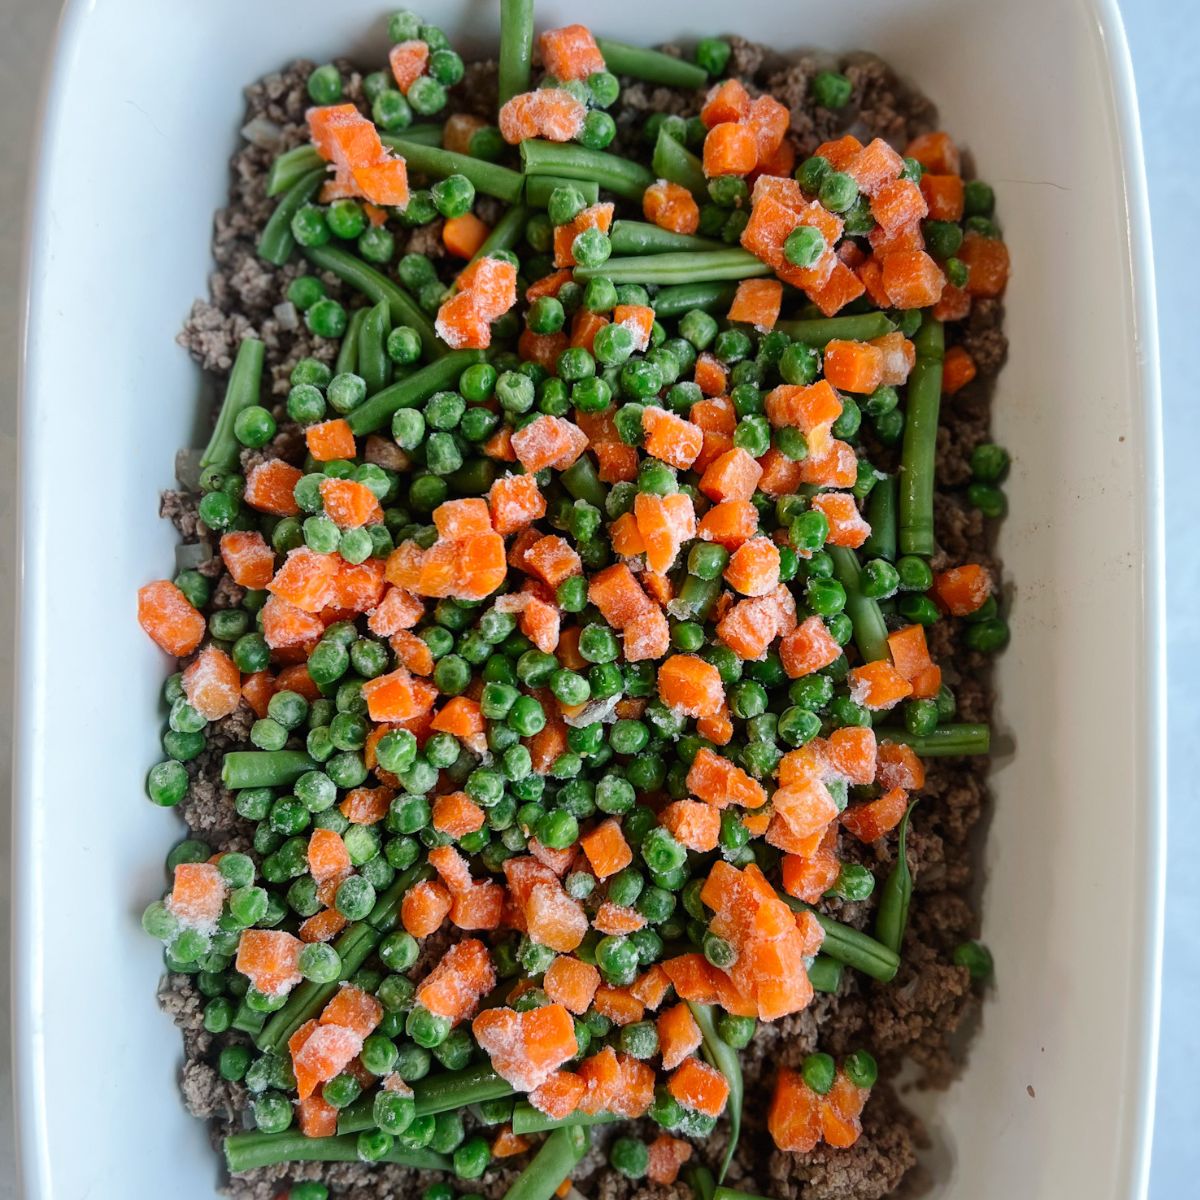 Casserole dish with ground beef and vegetables on top.